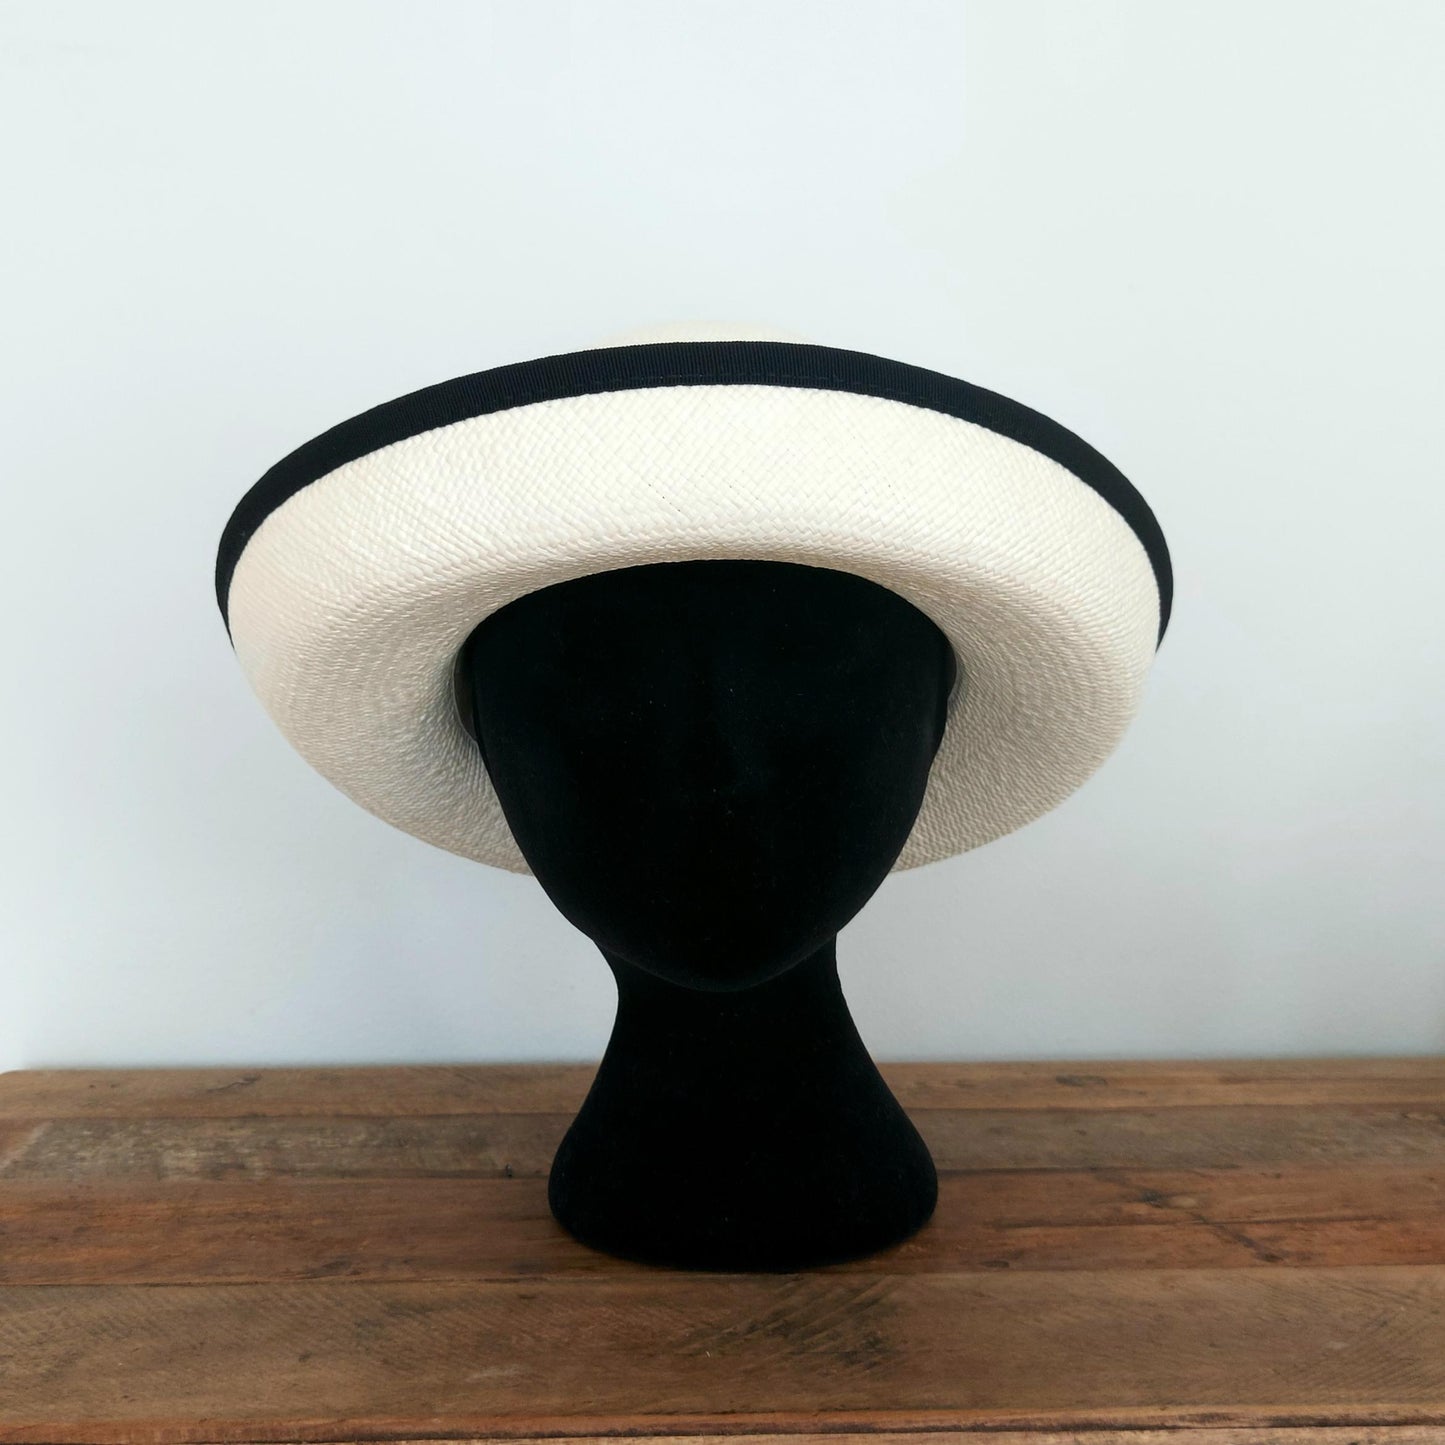 Anouck "Up and Down" brim cloche